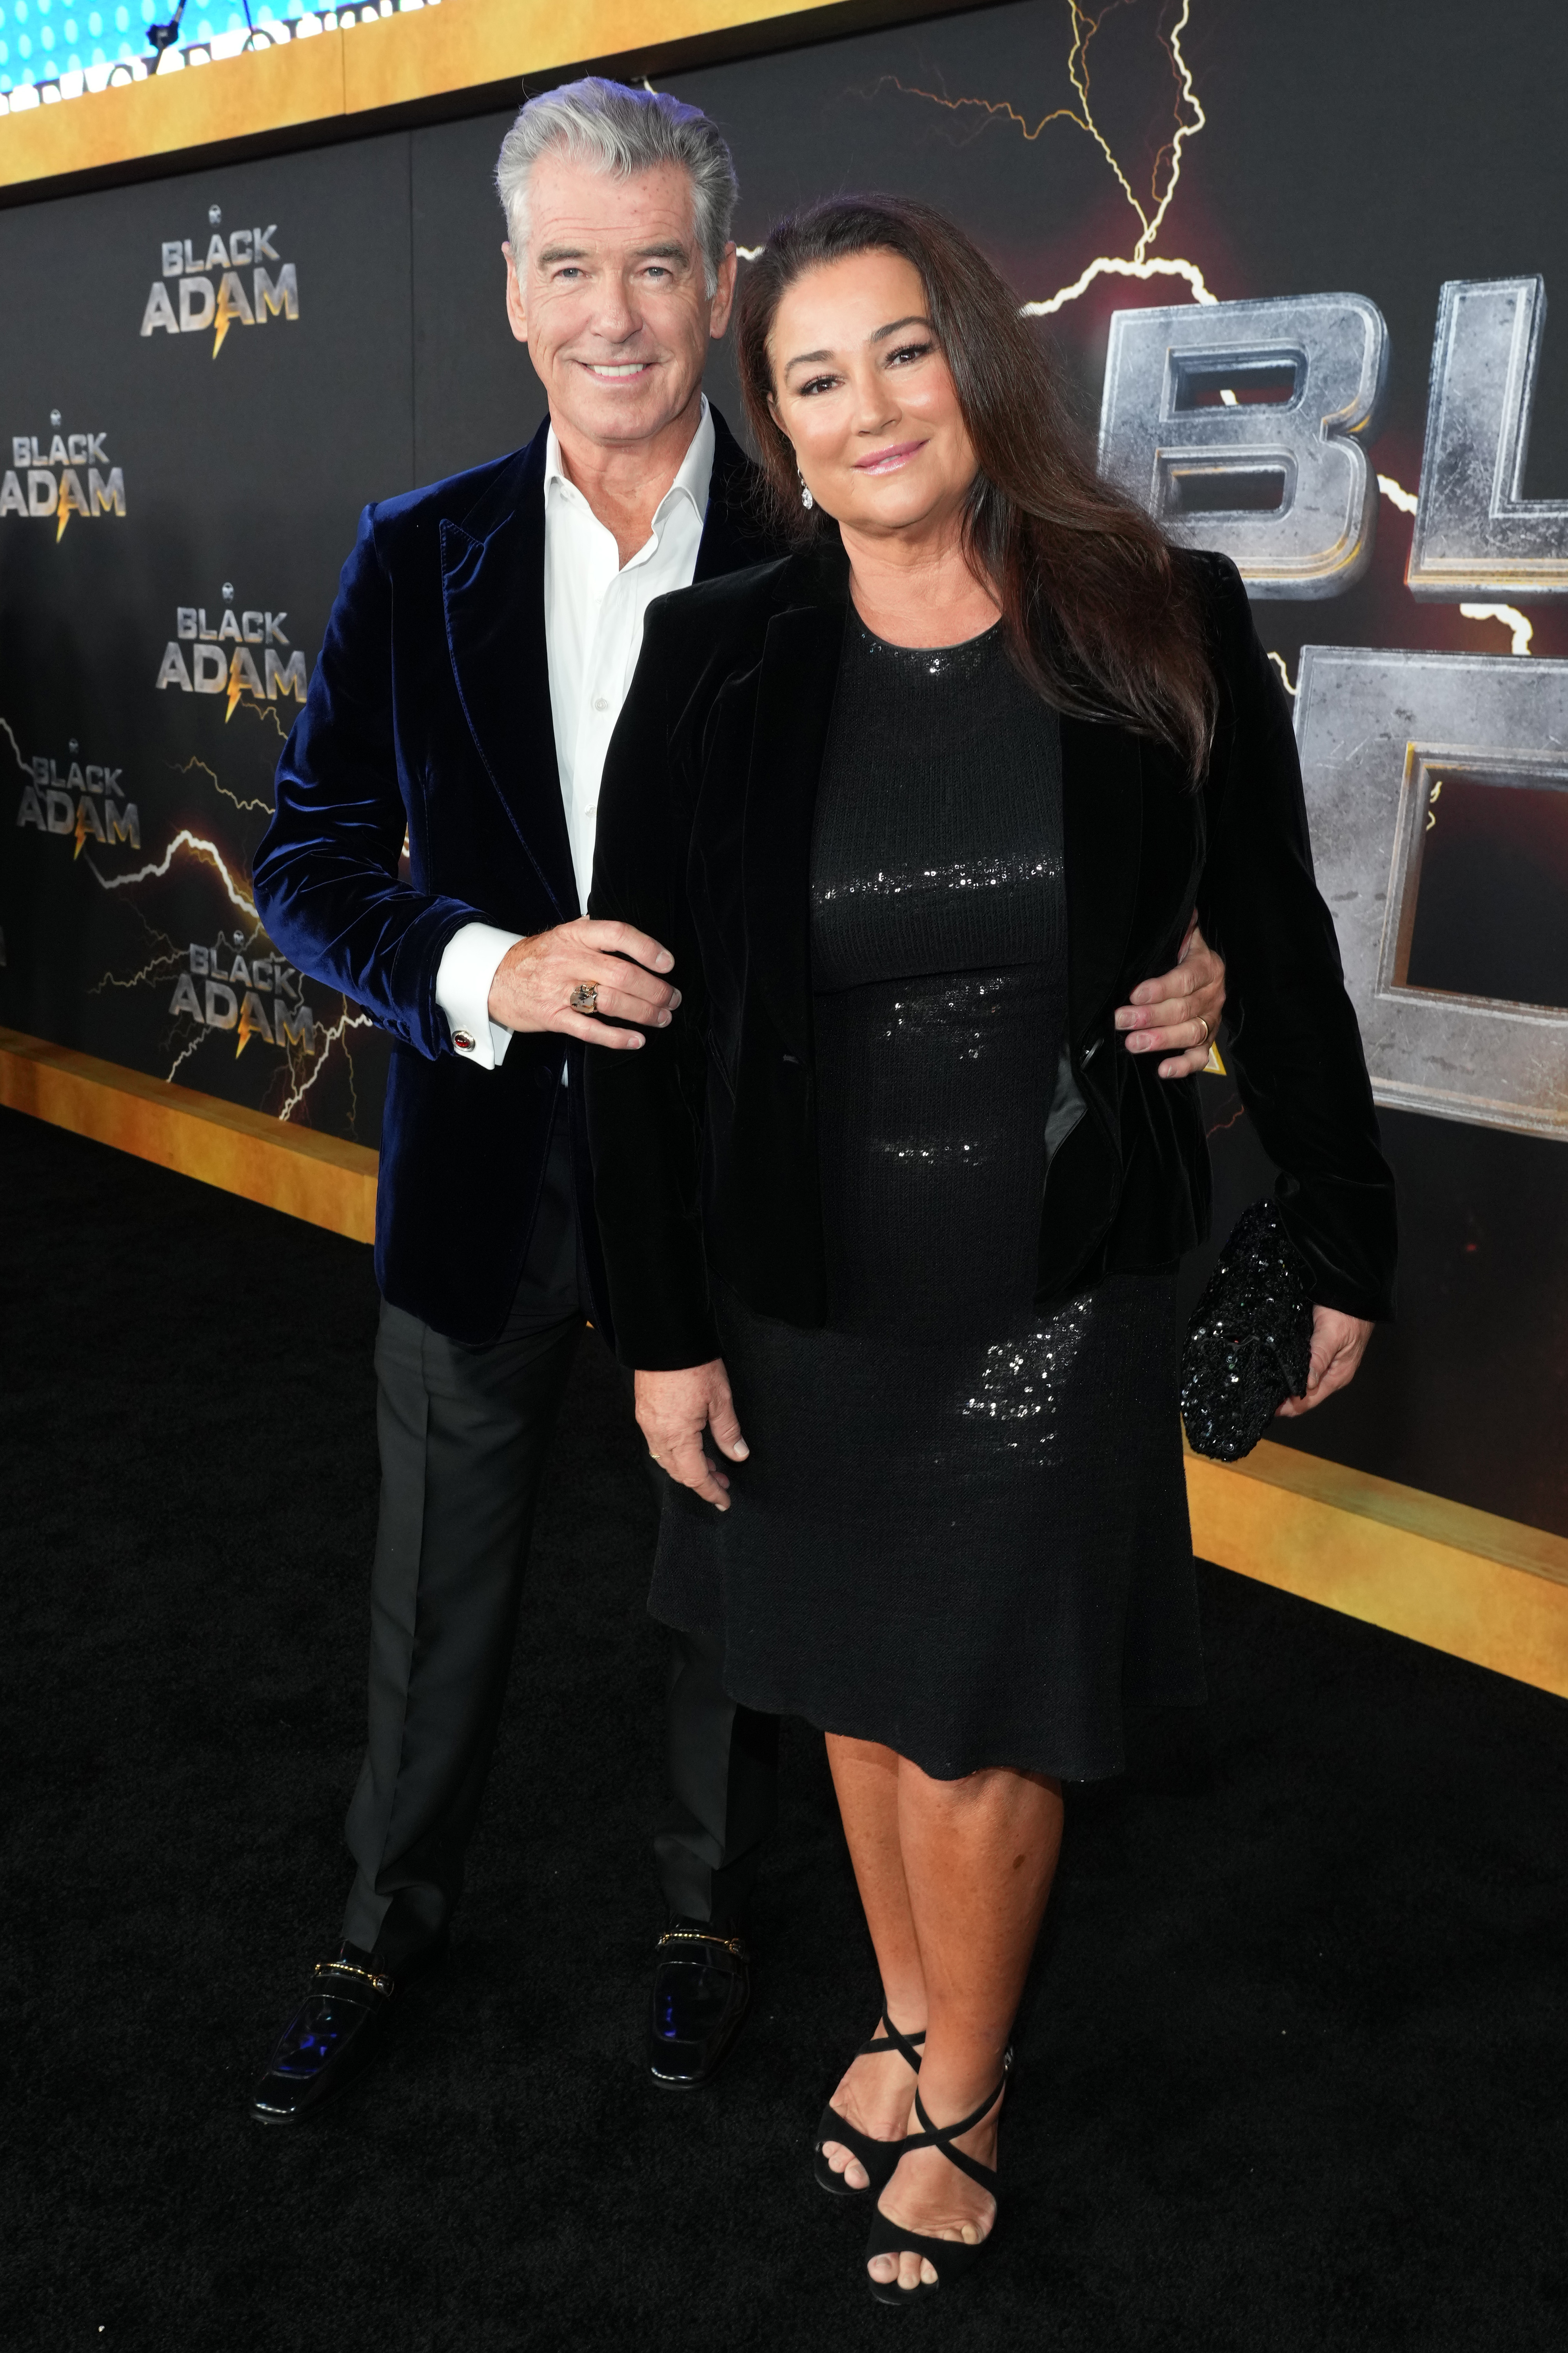 Pierce Brosnan and Keely Shaye Smith at DC's "Black Adam" New York Premiere, AMC Empire 25, October 12, 2022, New York City | Source: Getty Images